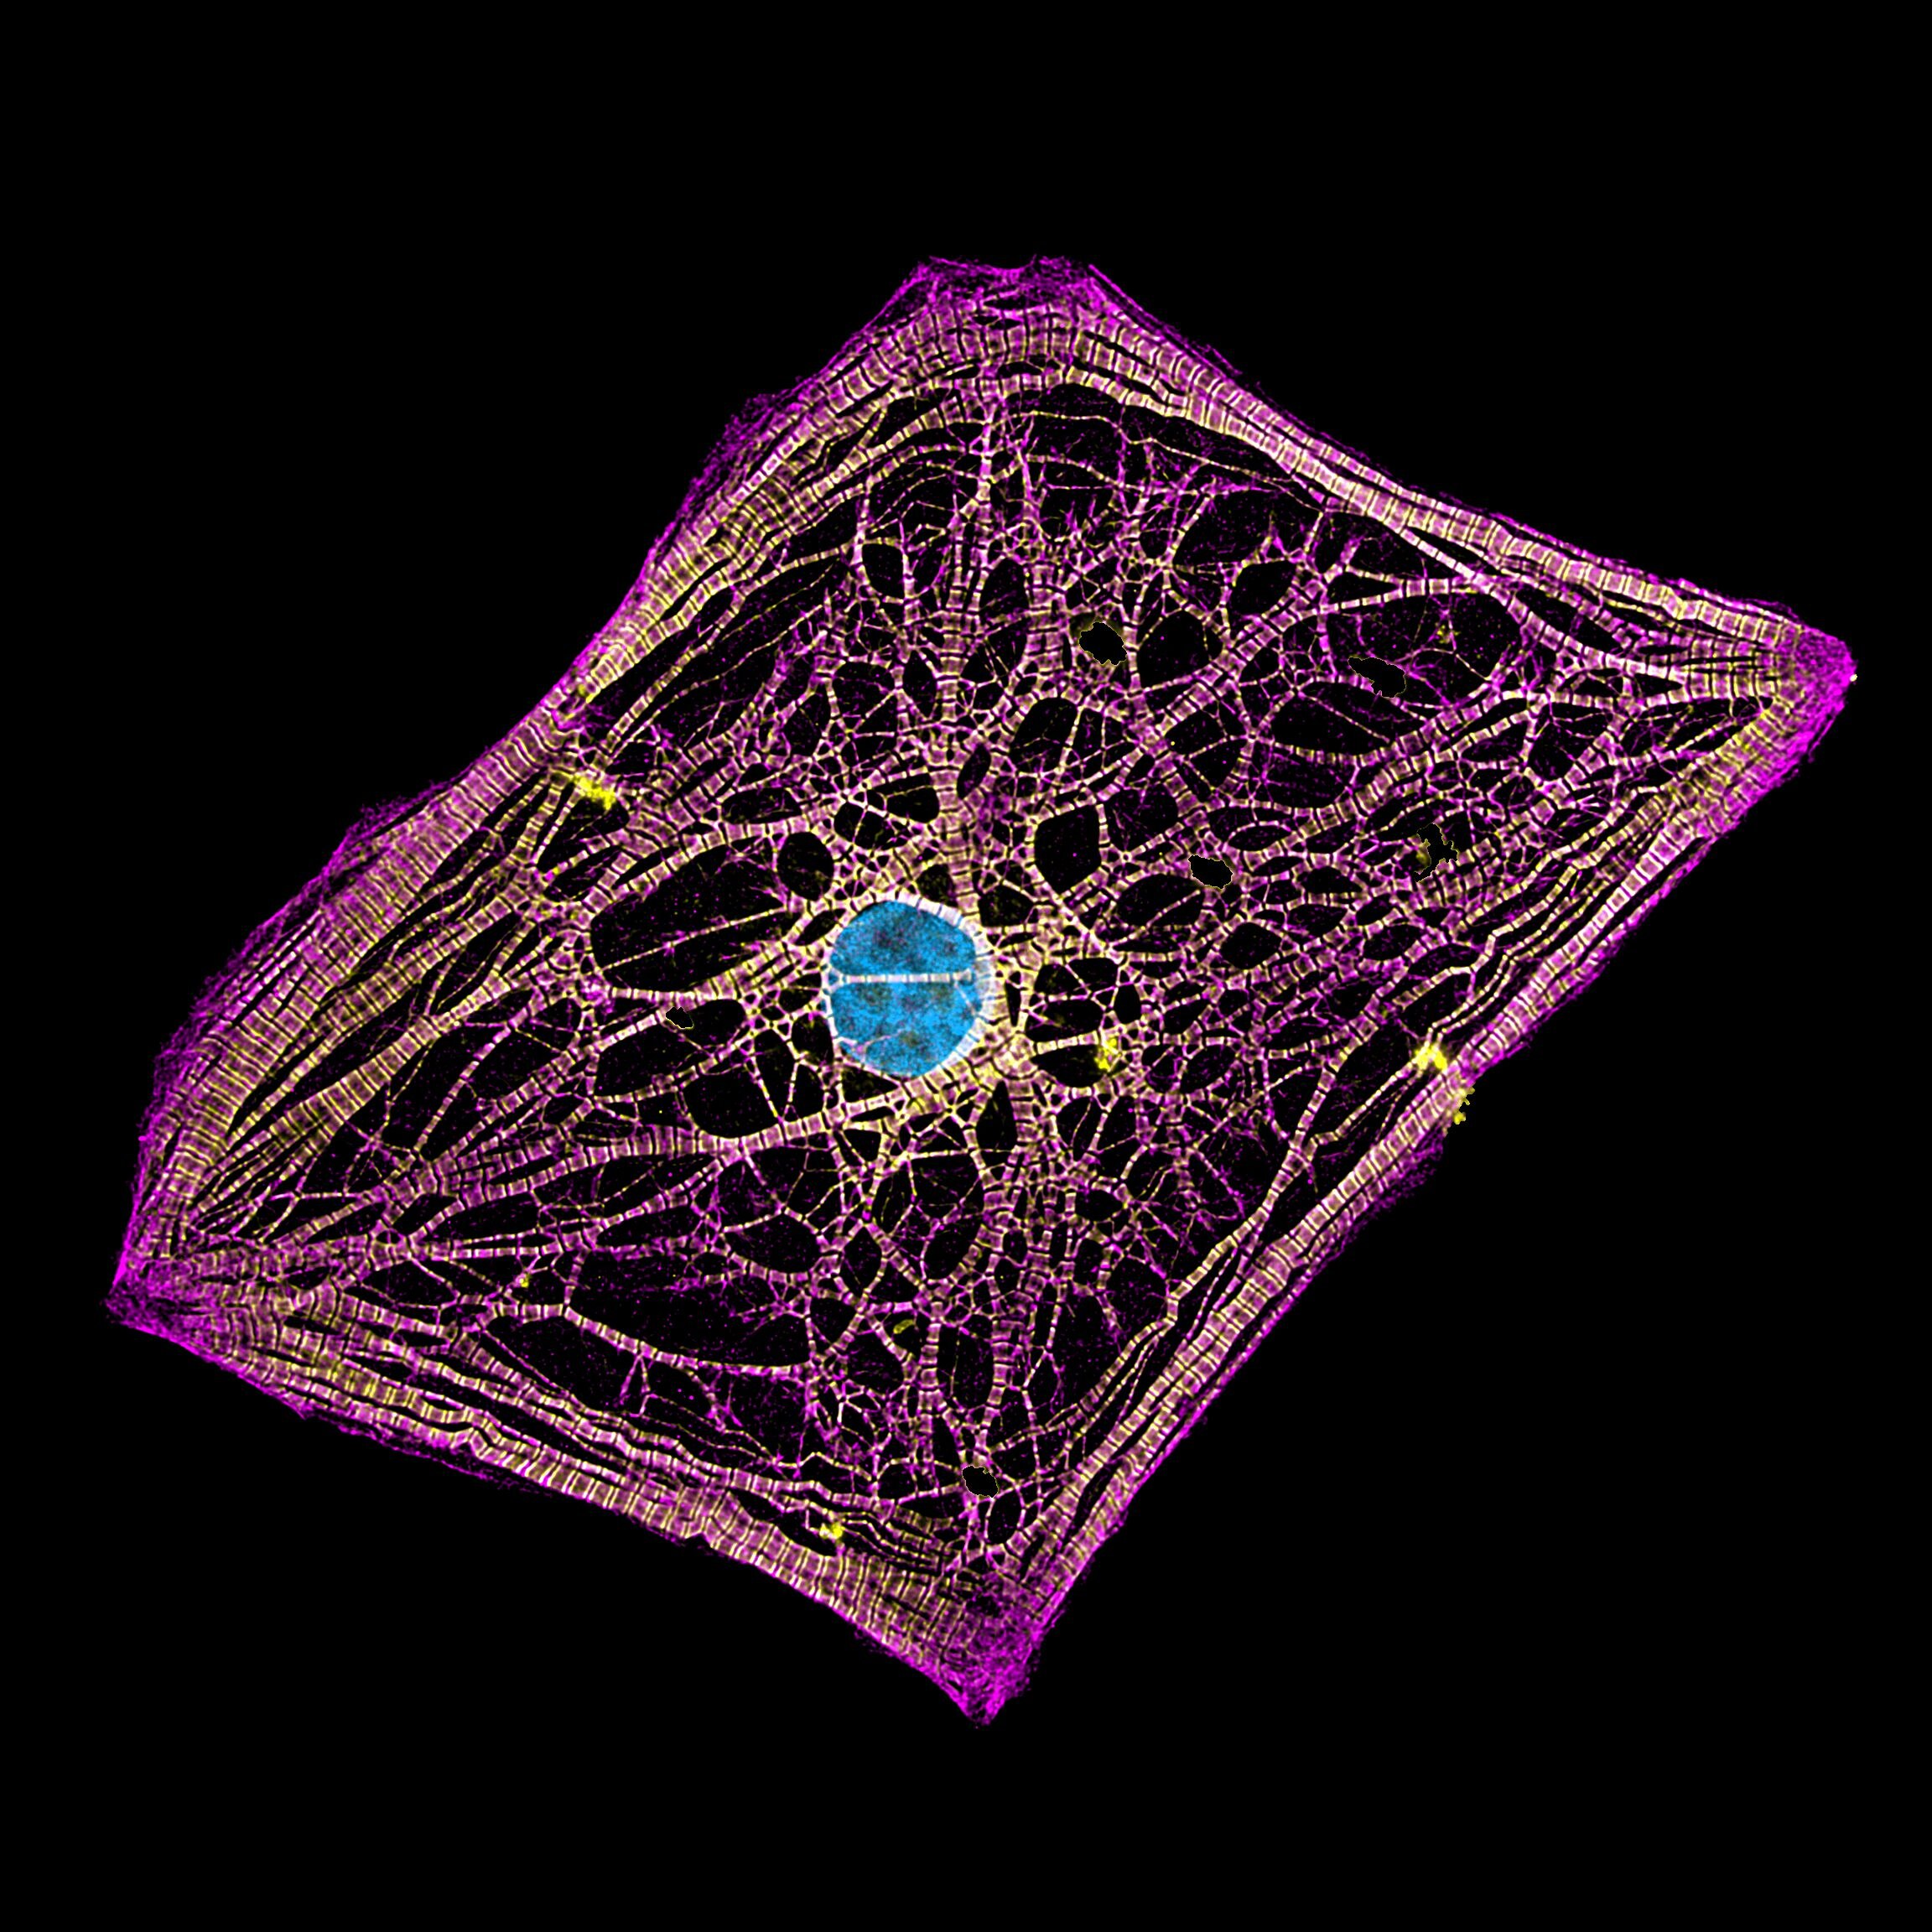 a diamond-shaped network of human heart cells shown in purple and yellow with a blue centre dot